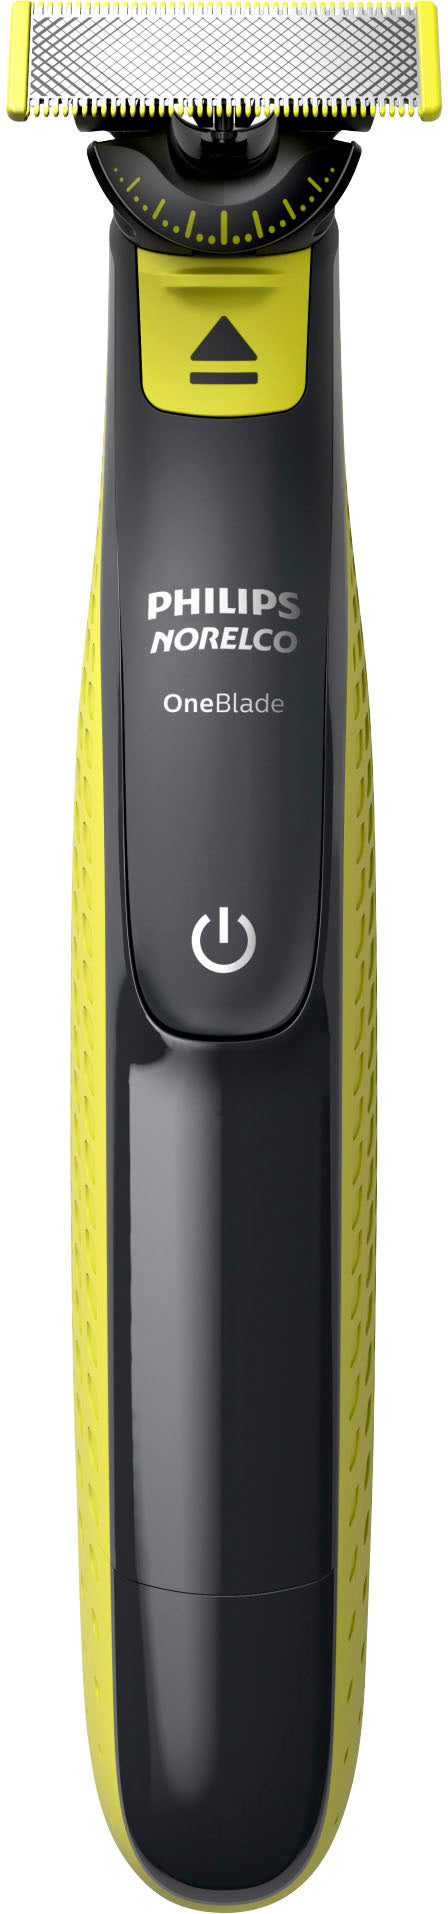 Philips Norelco OneBlade, 360 Face Hybrid Electric Trimmer and Shaver, QP2724/70 - Black And Lime Green_0